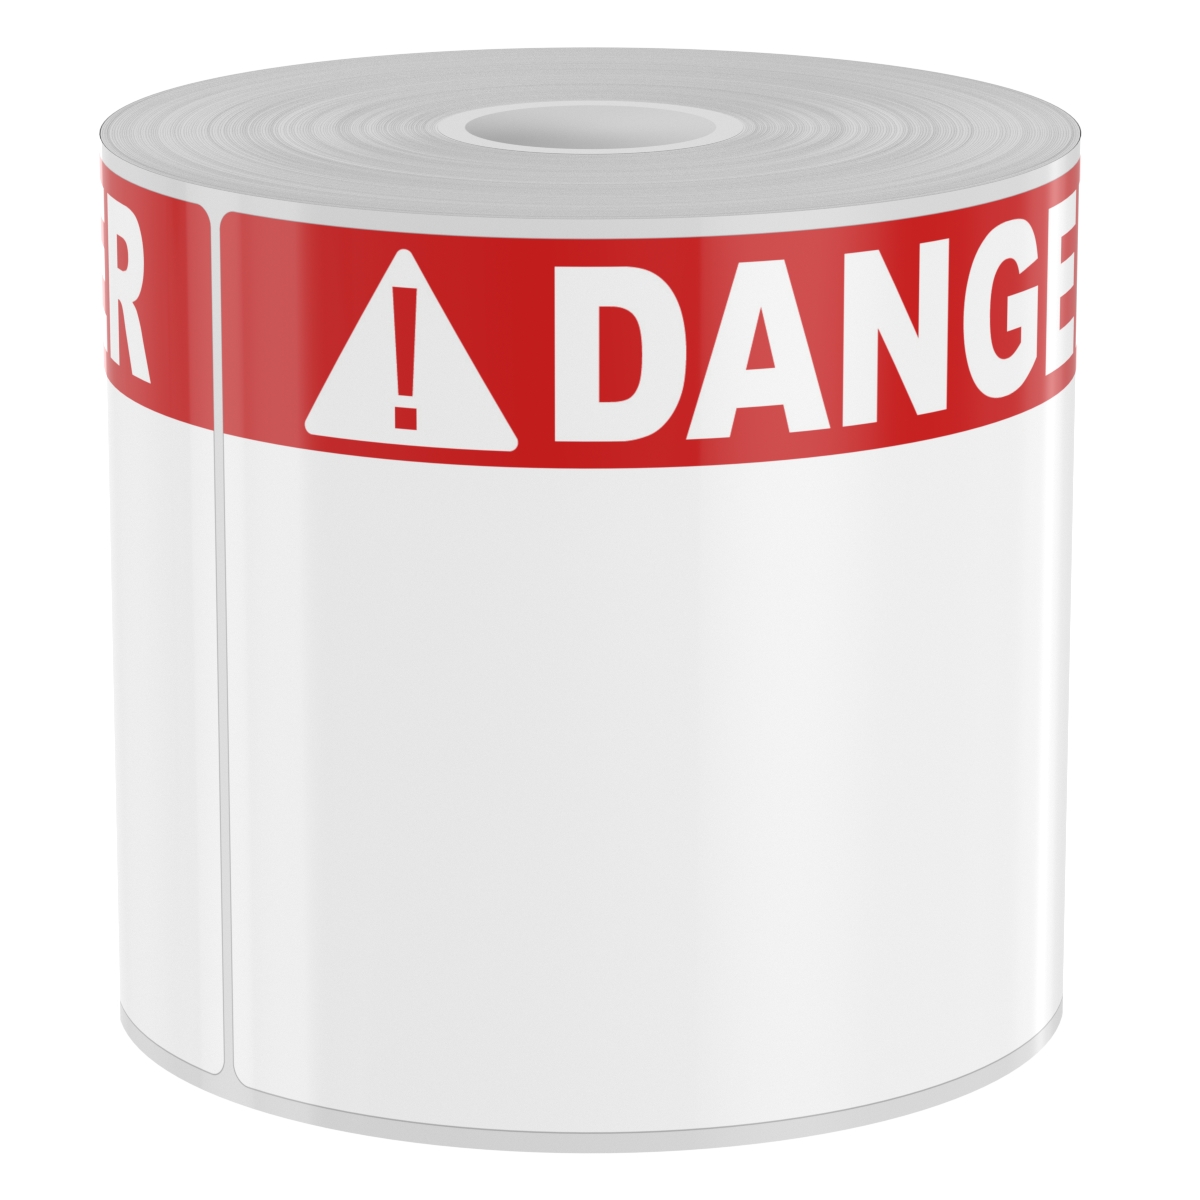 Detail view for 250 4" x 6" High-Performance Arc Flash labels White Danger on Red Band